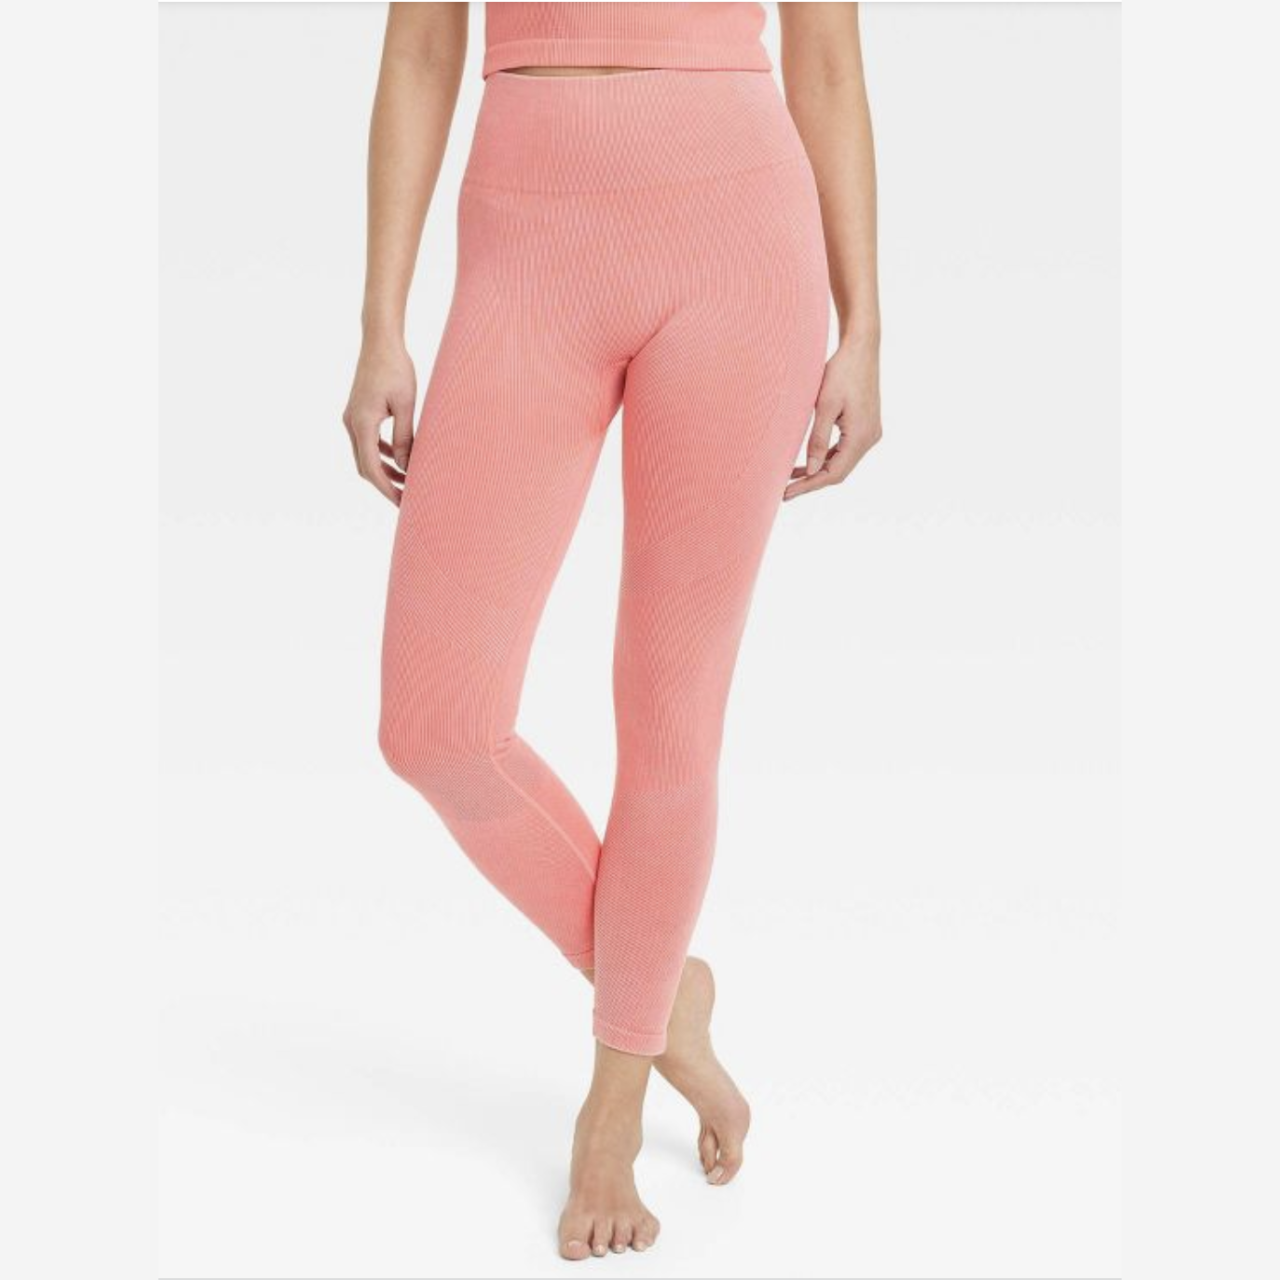 The JoyLab High-Rise Ribbed Leggings are back in stock at Target